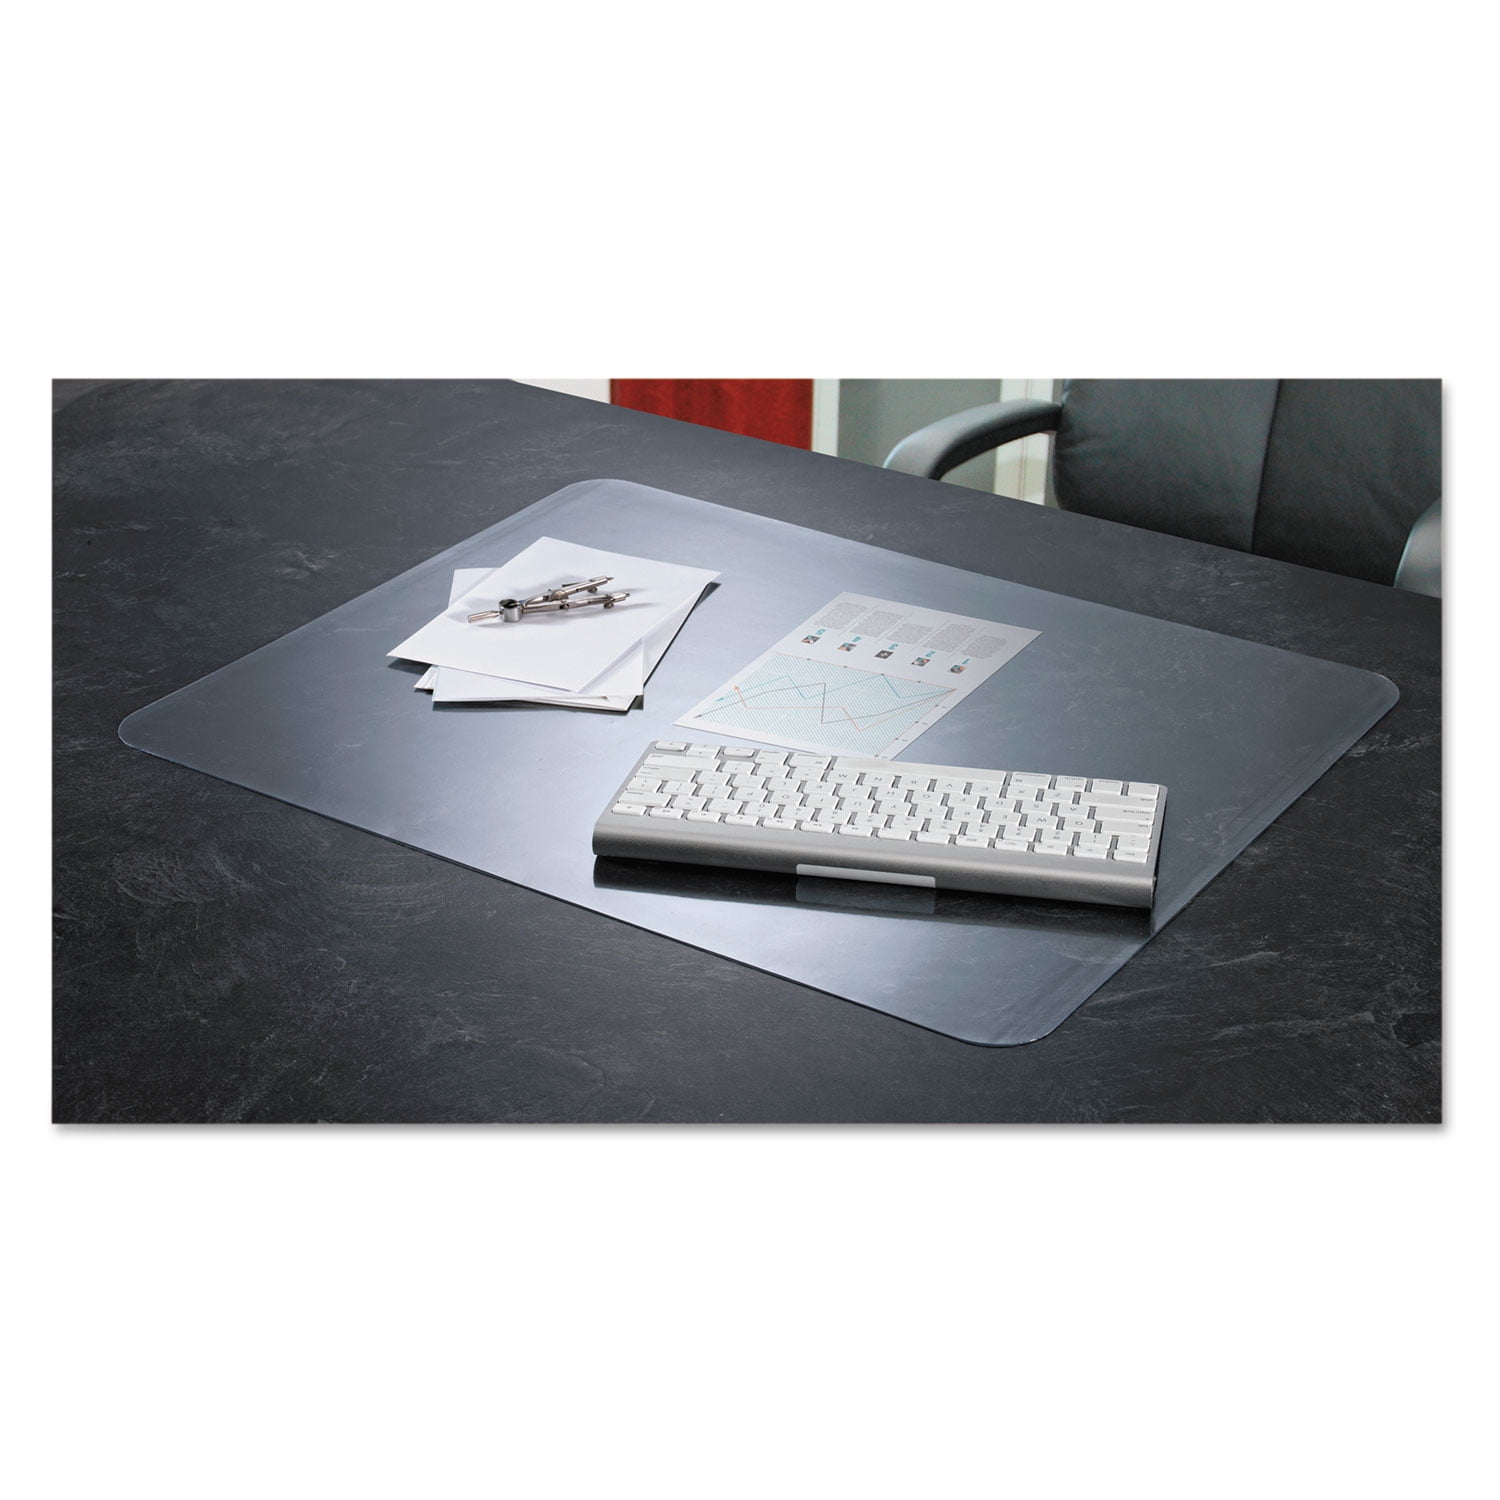 47 x 23 Inch Plastic Computer Pad for Desk Office Desk Mat Clear Textured 